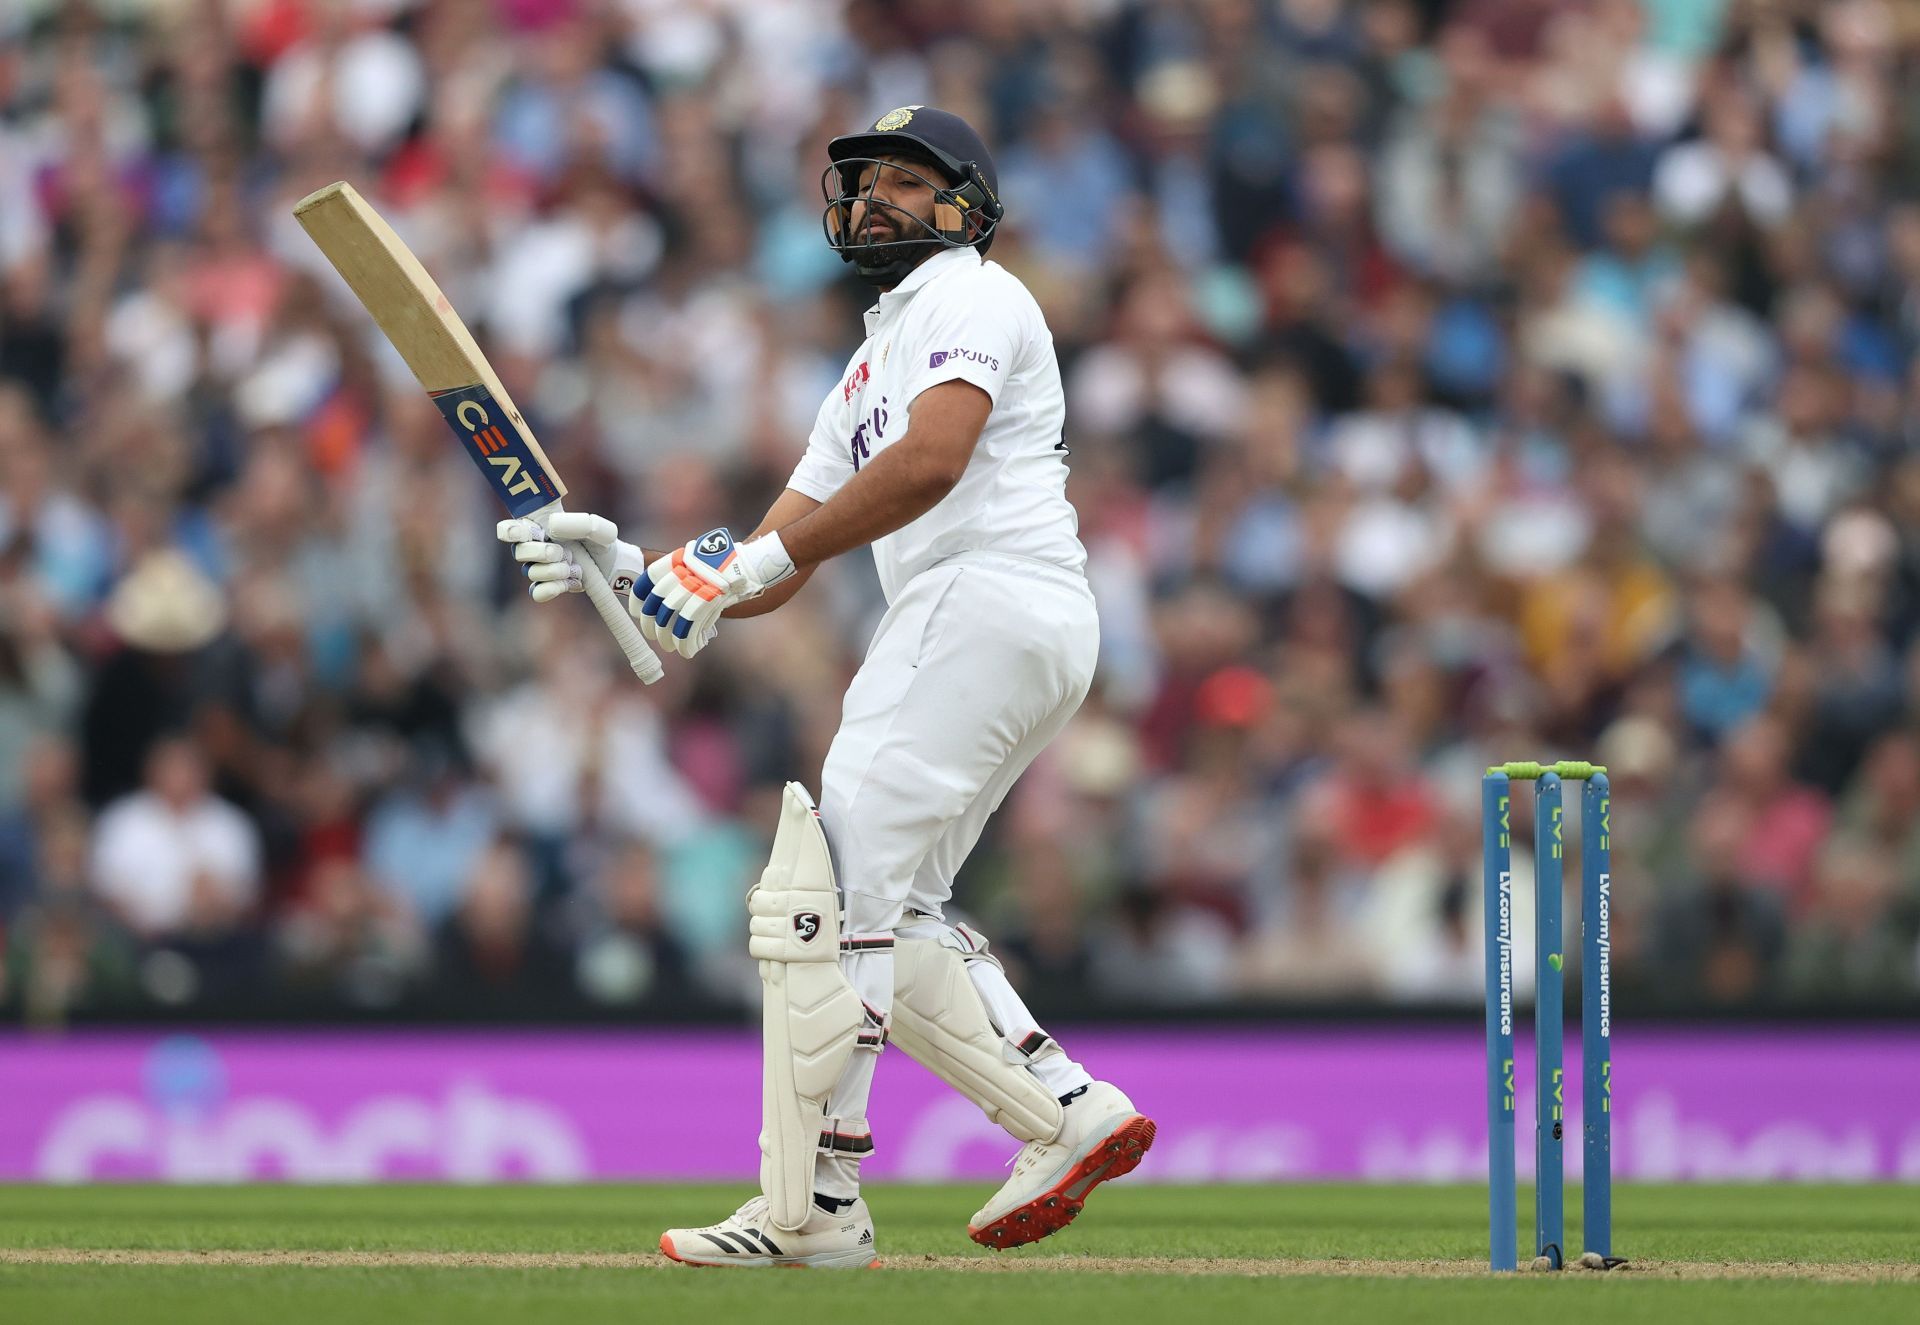 The first Test vs Sri Lanka will witness a new-look Indian side with Rohit Sharma at the helm (Getty Images)